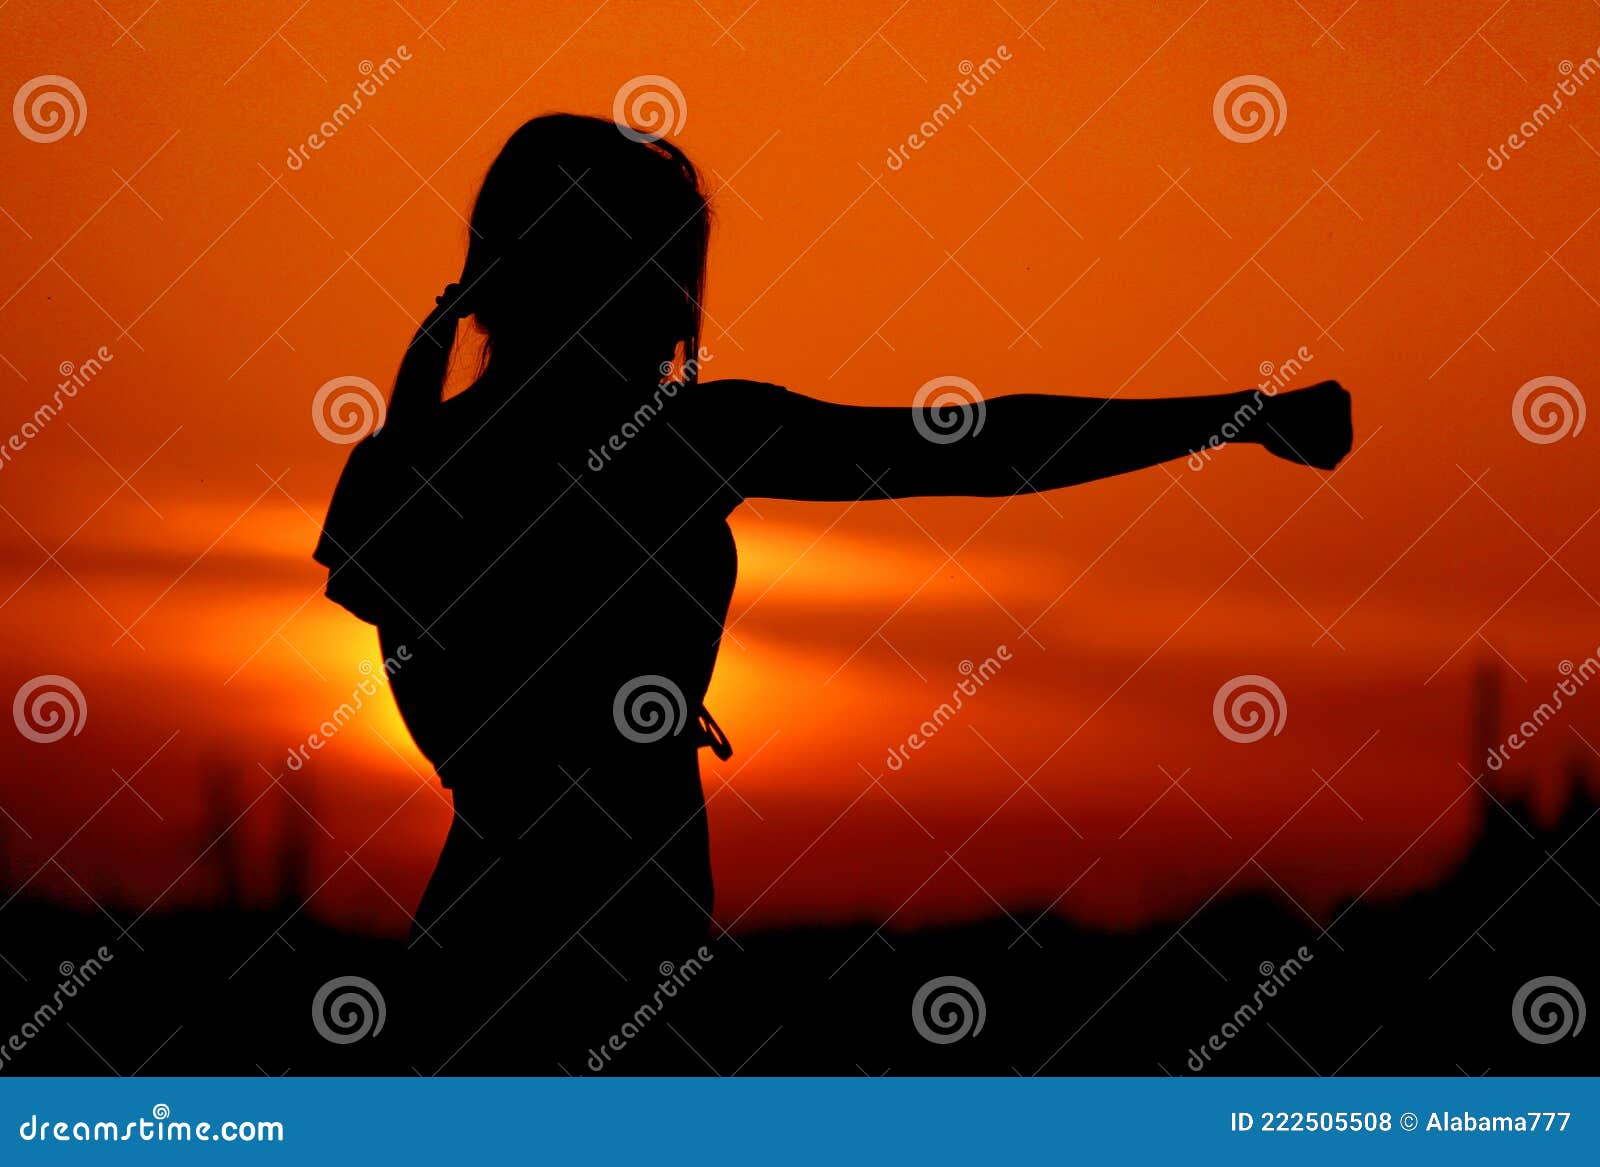 Shadow of a Woman Practicing Karate on the Sunset Stock Photo ...